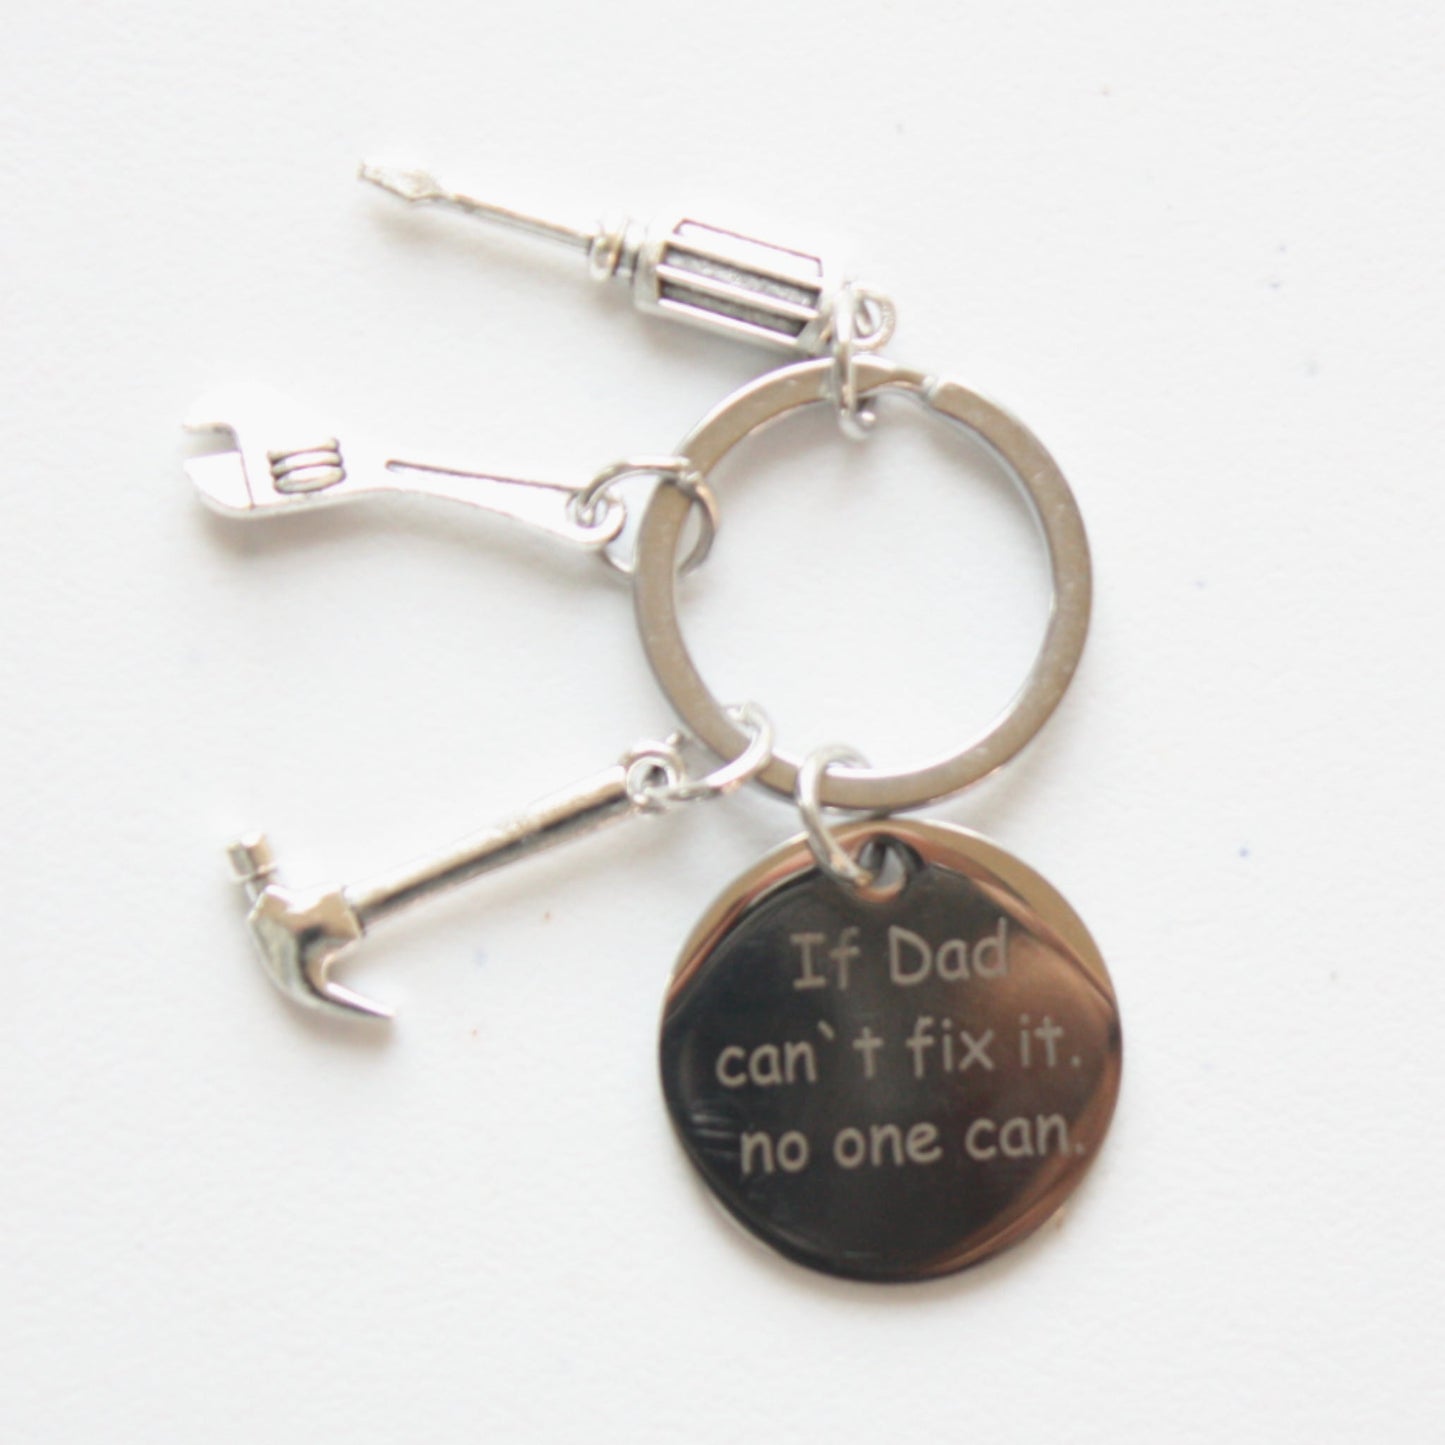 If Dad Can't Fix it No One Can Keychain - Made in the USA